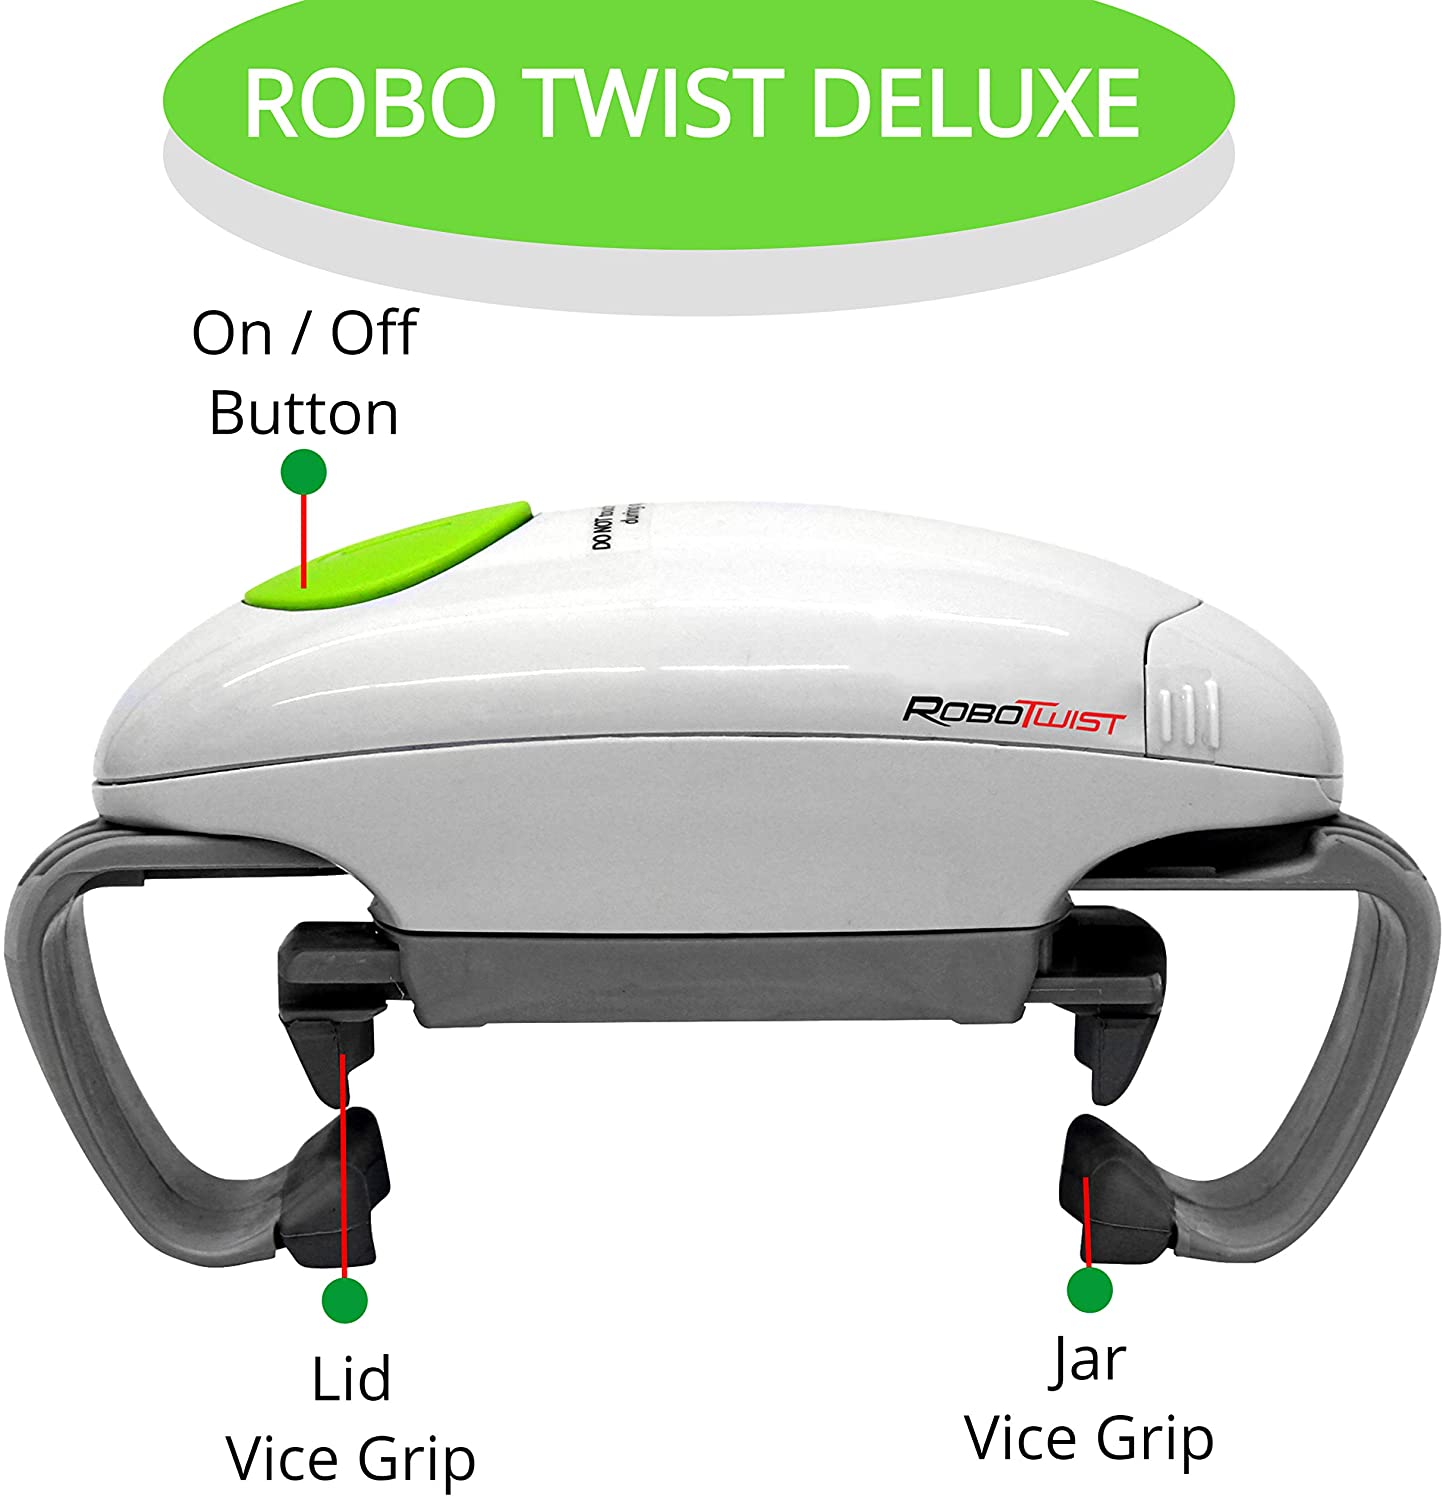 Robotwist Deluxe 7321 Automatic Jar Opener As Seen, Higher Torque for Improved Jar Opening Performance On TV